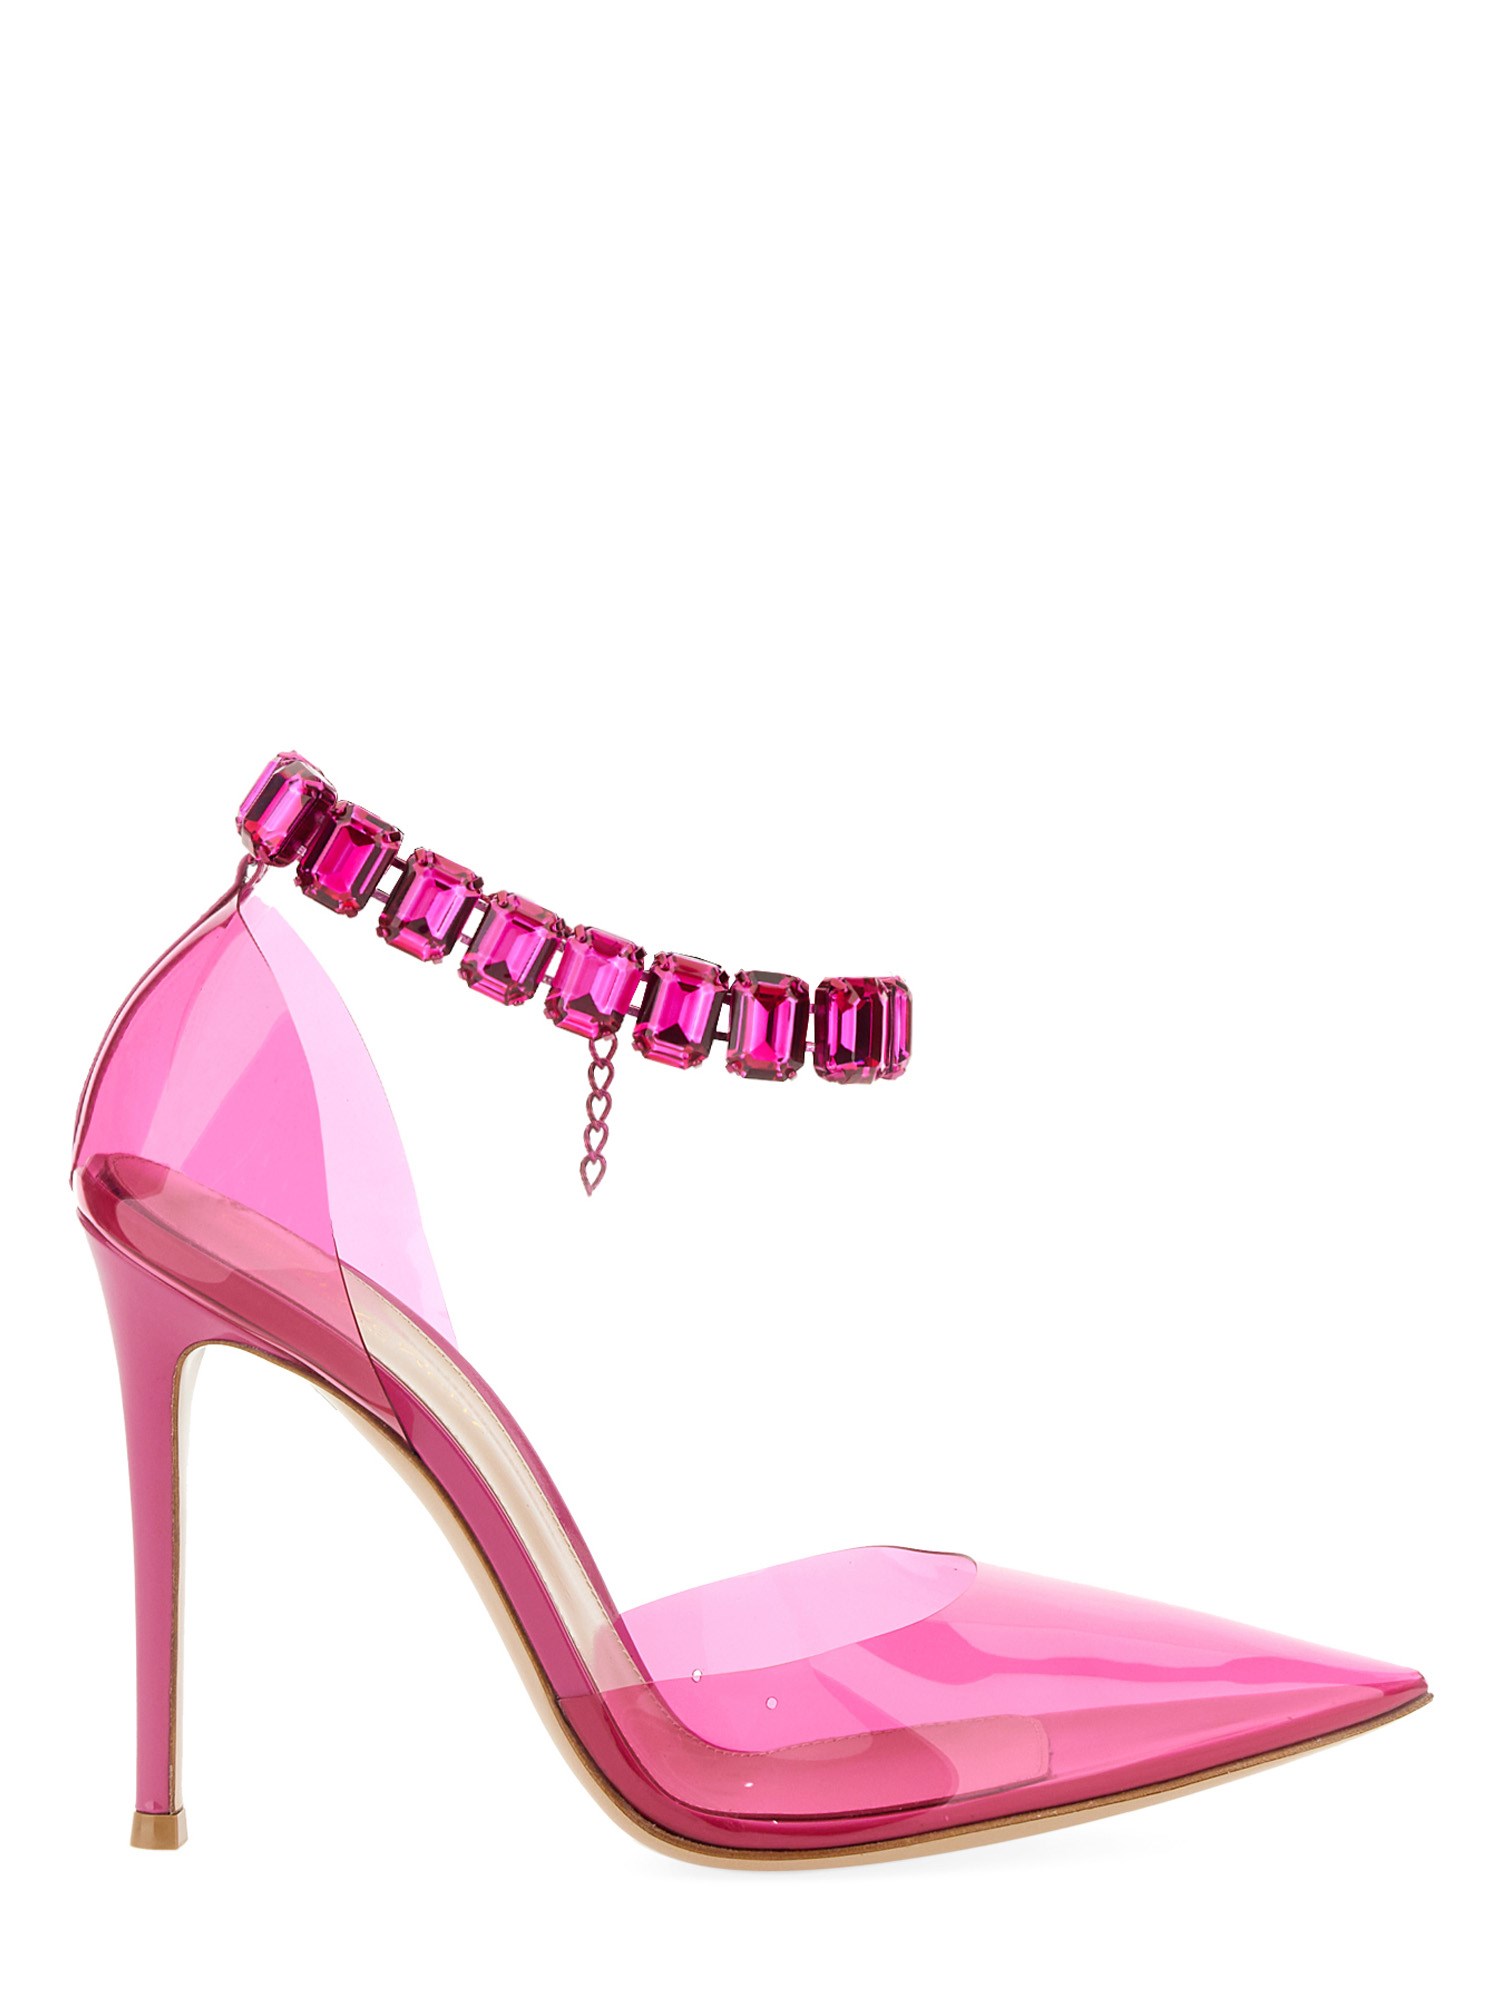 Gianvito Rossi Sandal With Crystals In Fuchsia